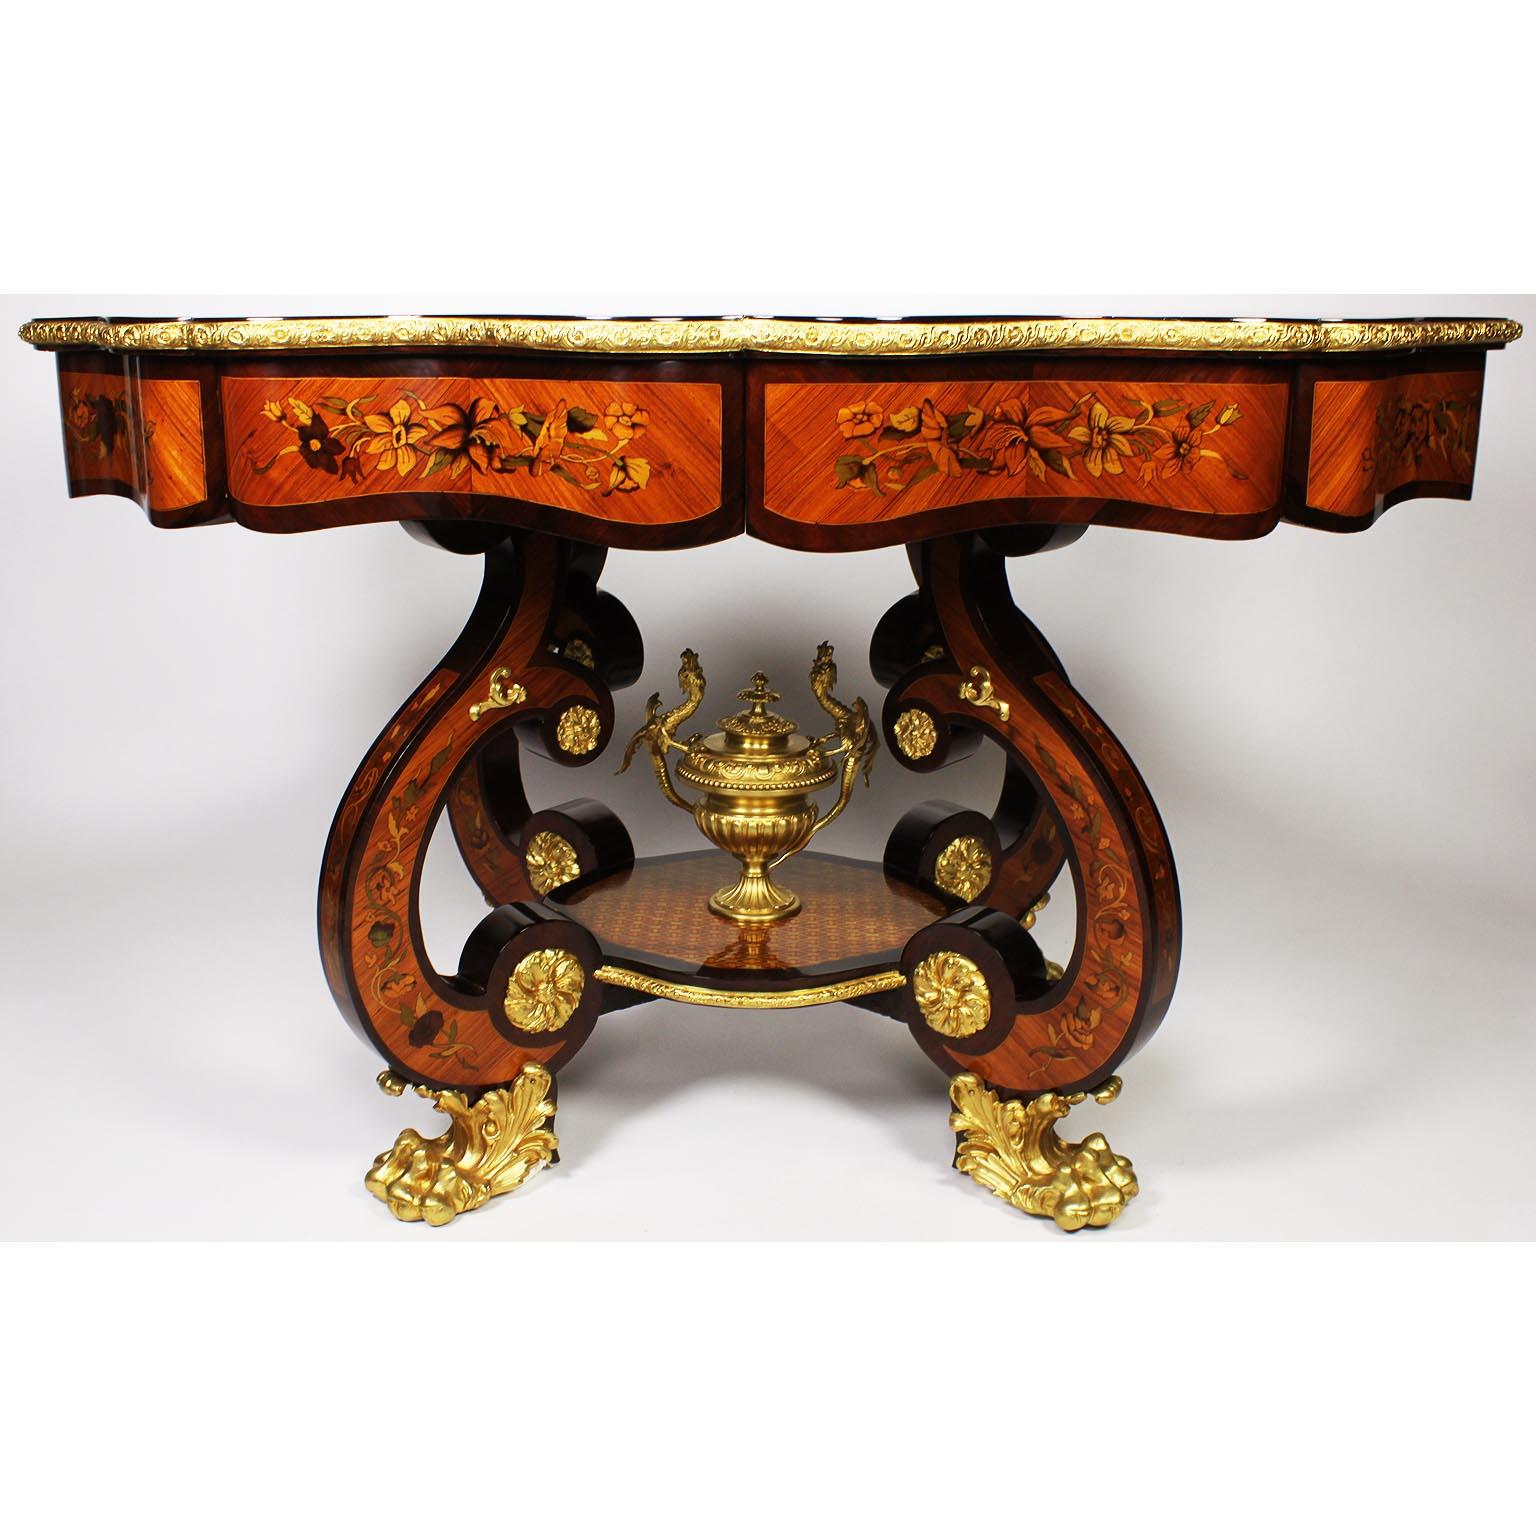 Carved Fine Italian 19th Century Floral Marquetry Gilt Bronze-Mounted Center Table Desk For Sale